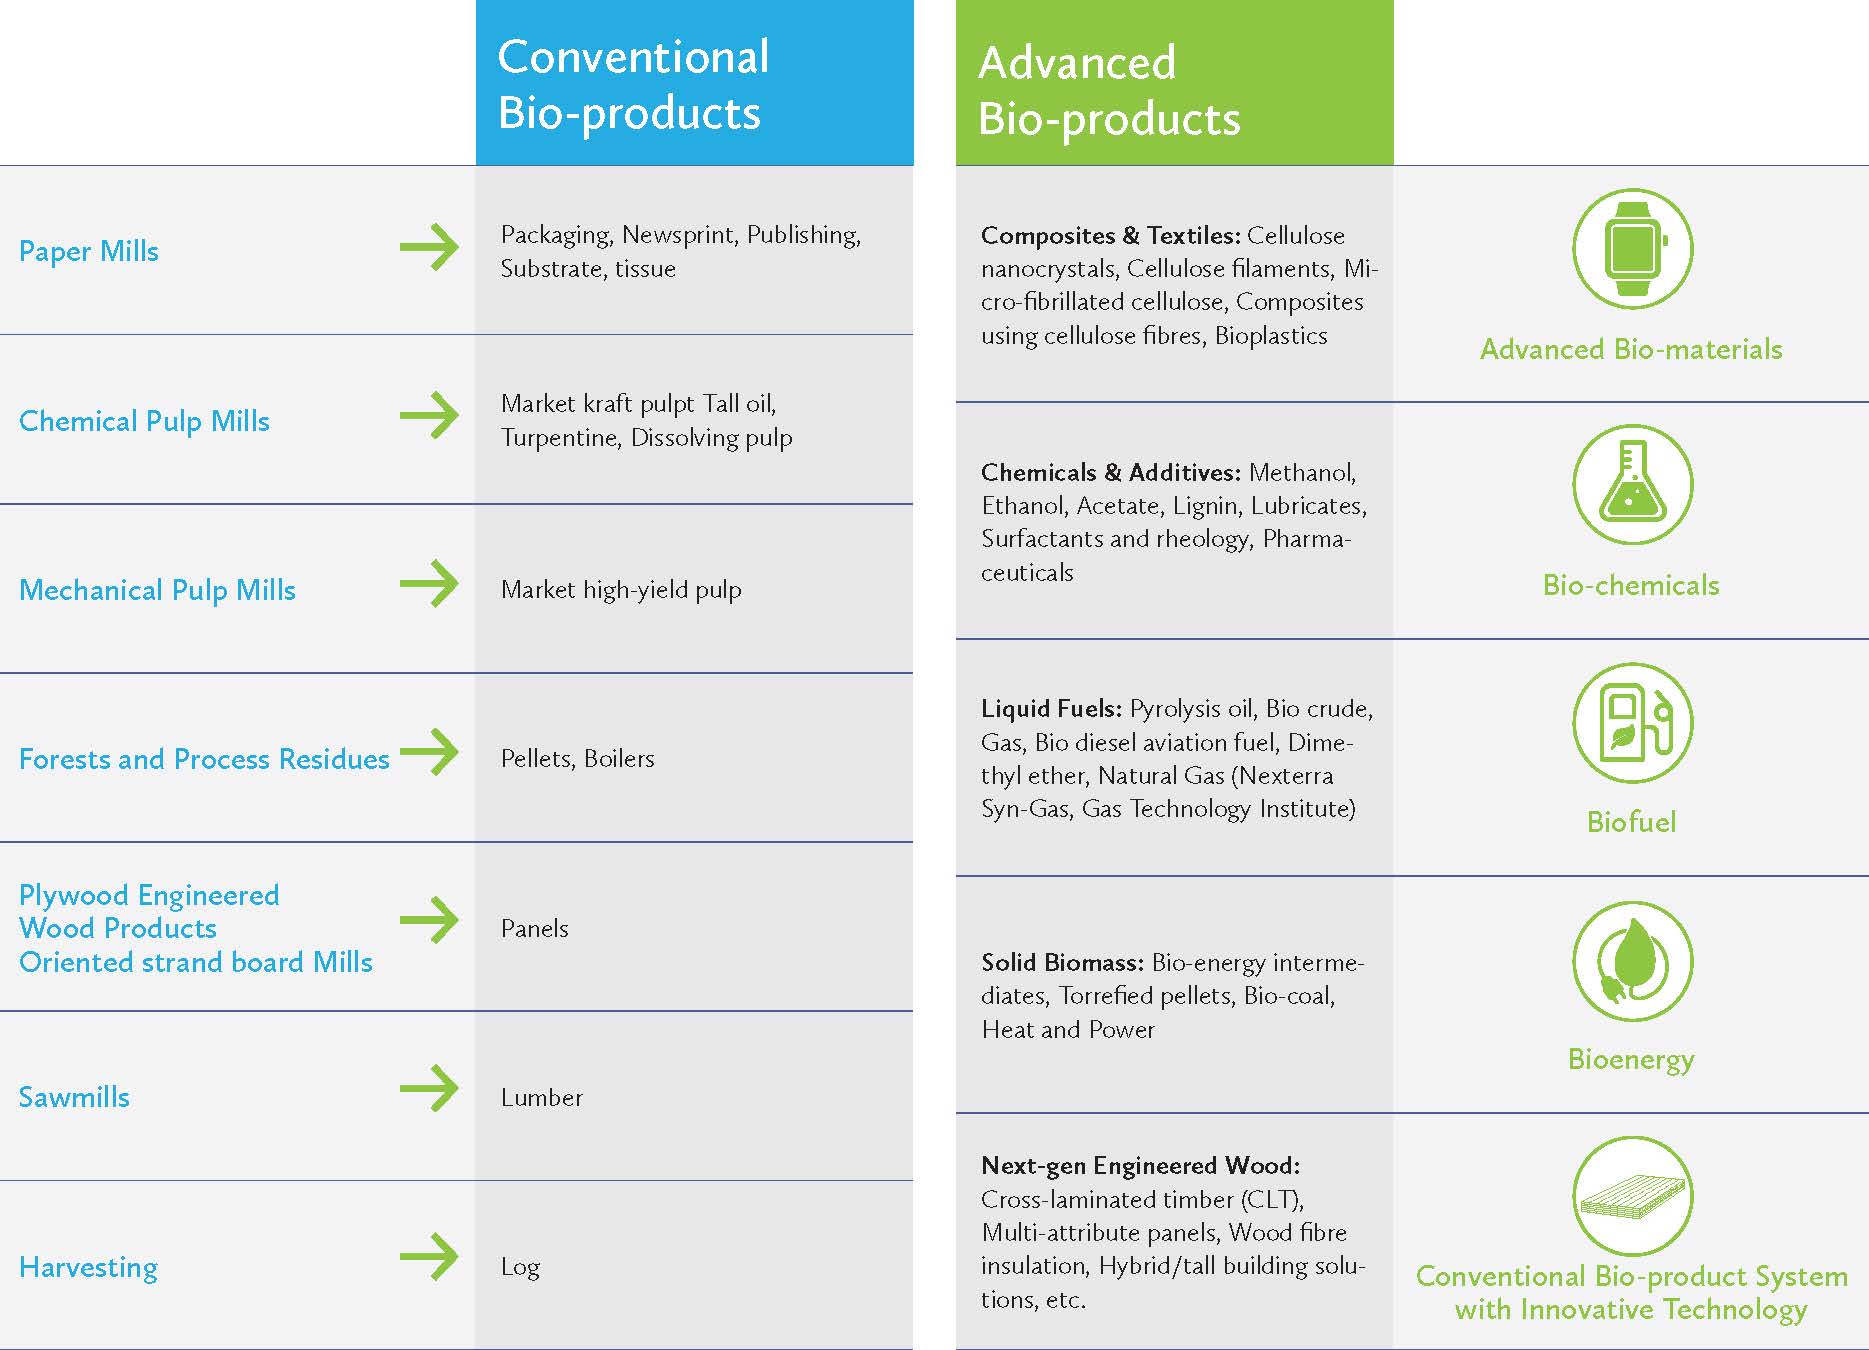 Comparison of Conventional and Advanced Bio-products